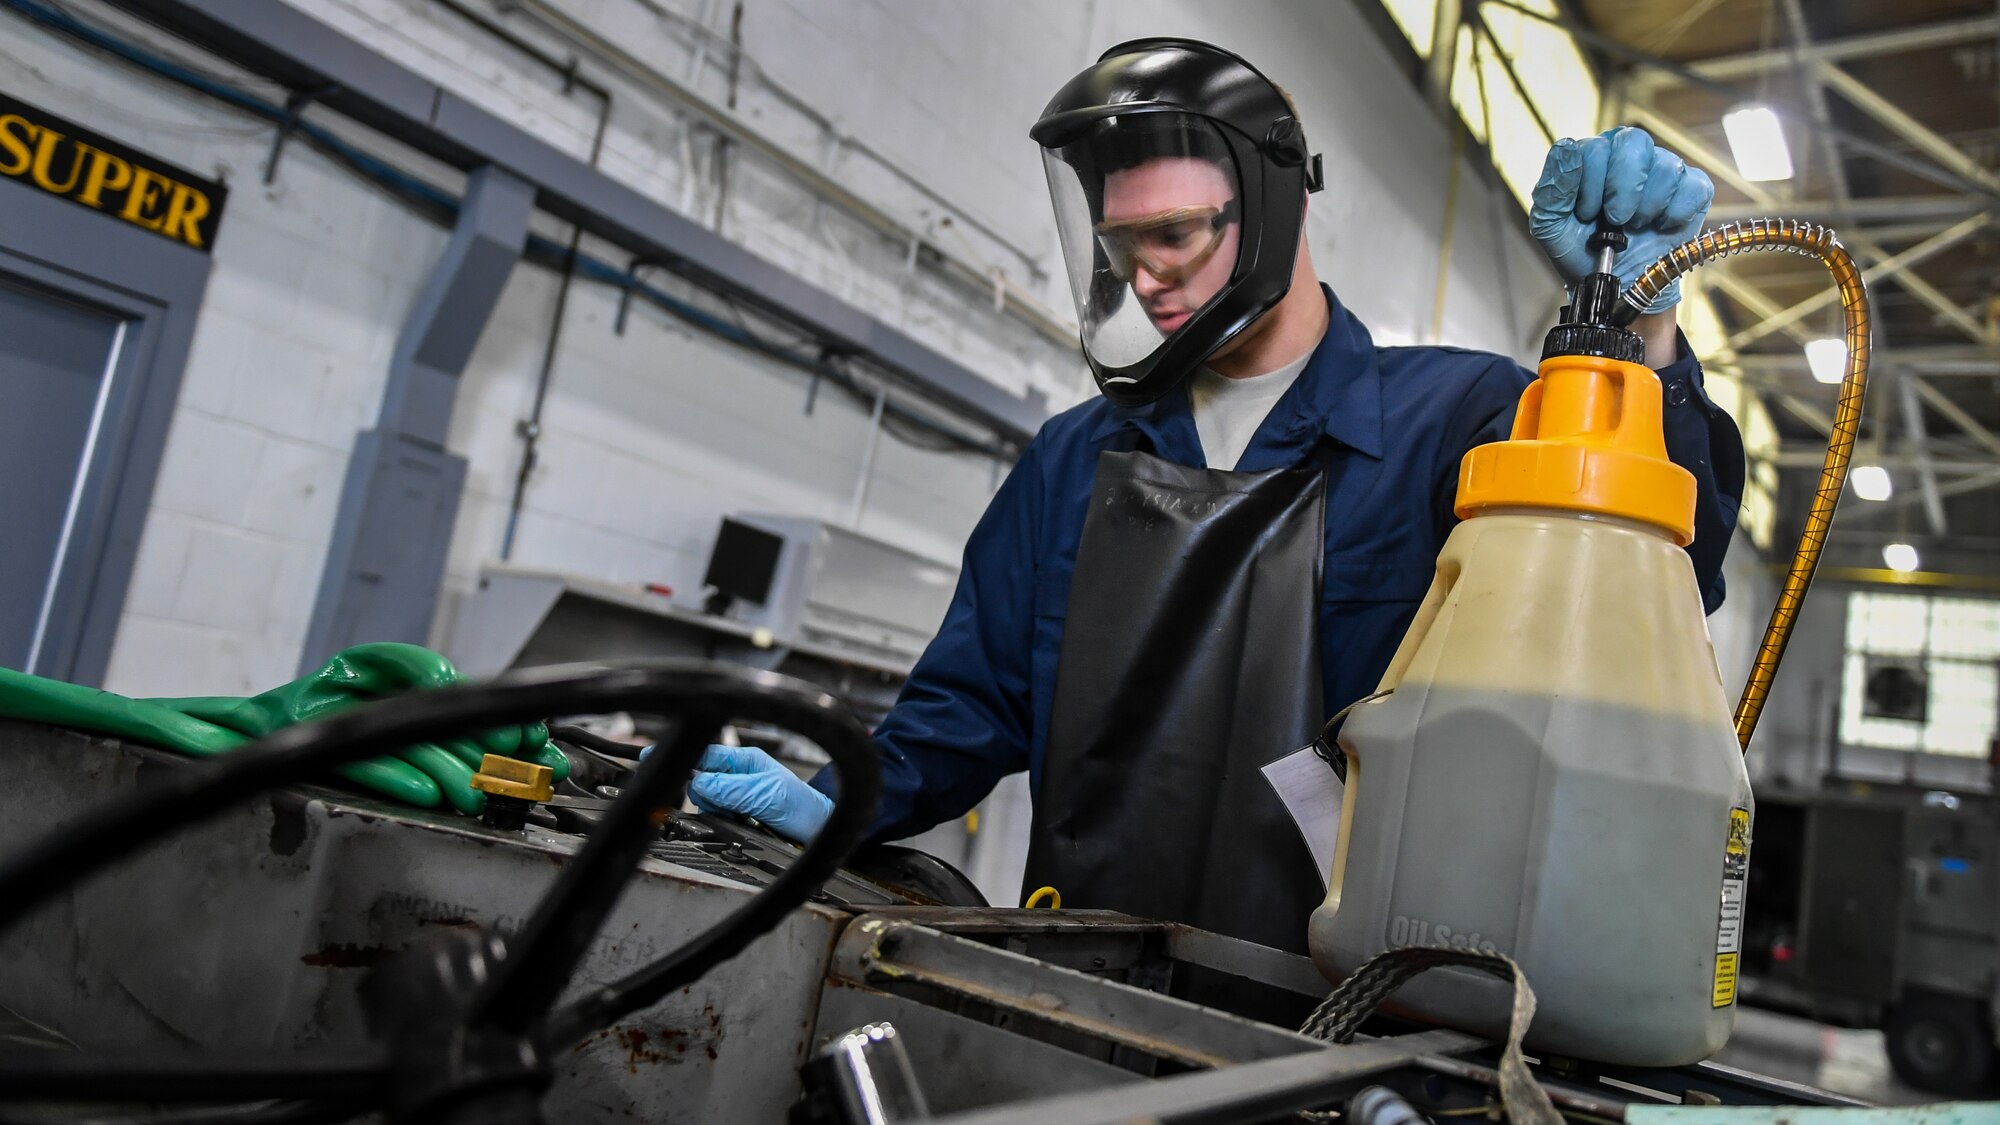 Airman 1st Class Jared Fayard, 2nd Maintenance Squadron aerospace ground equipment technician, adds new motor oil to a bomb loader vehicle at Barksdale Air Force Base, La., Feb. 27, 2018. Fayard changed the engine oil as part of an annual safety inspection conducted on all bomb loading vehicles.